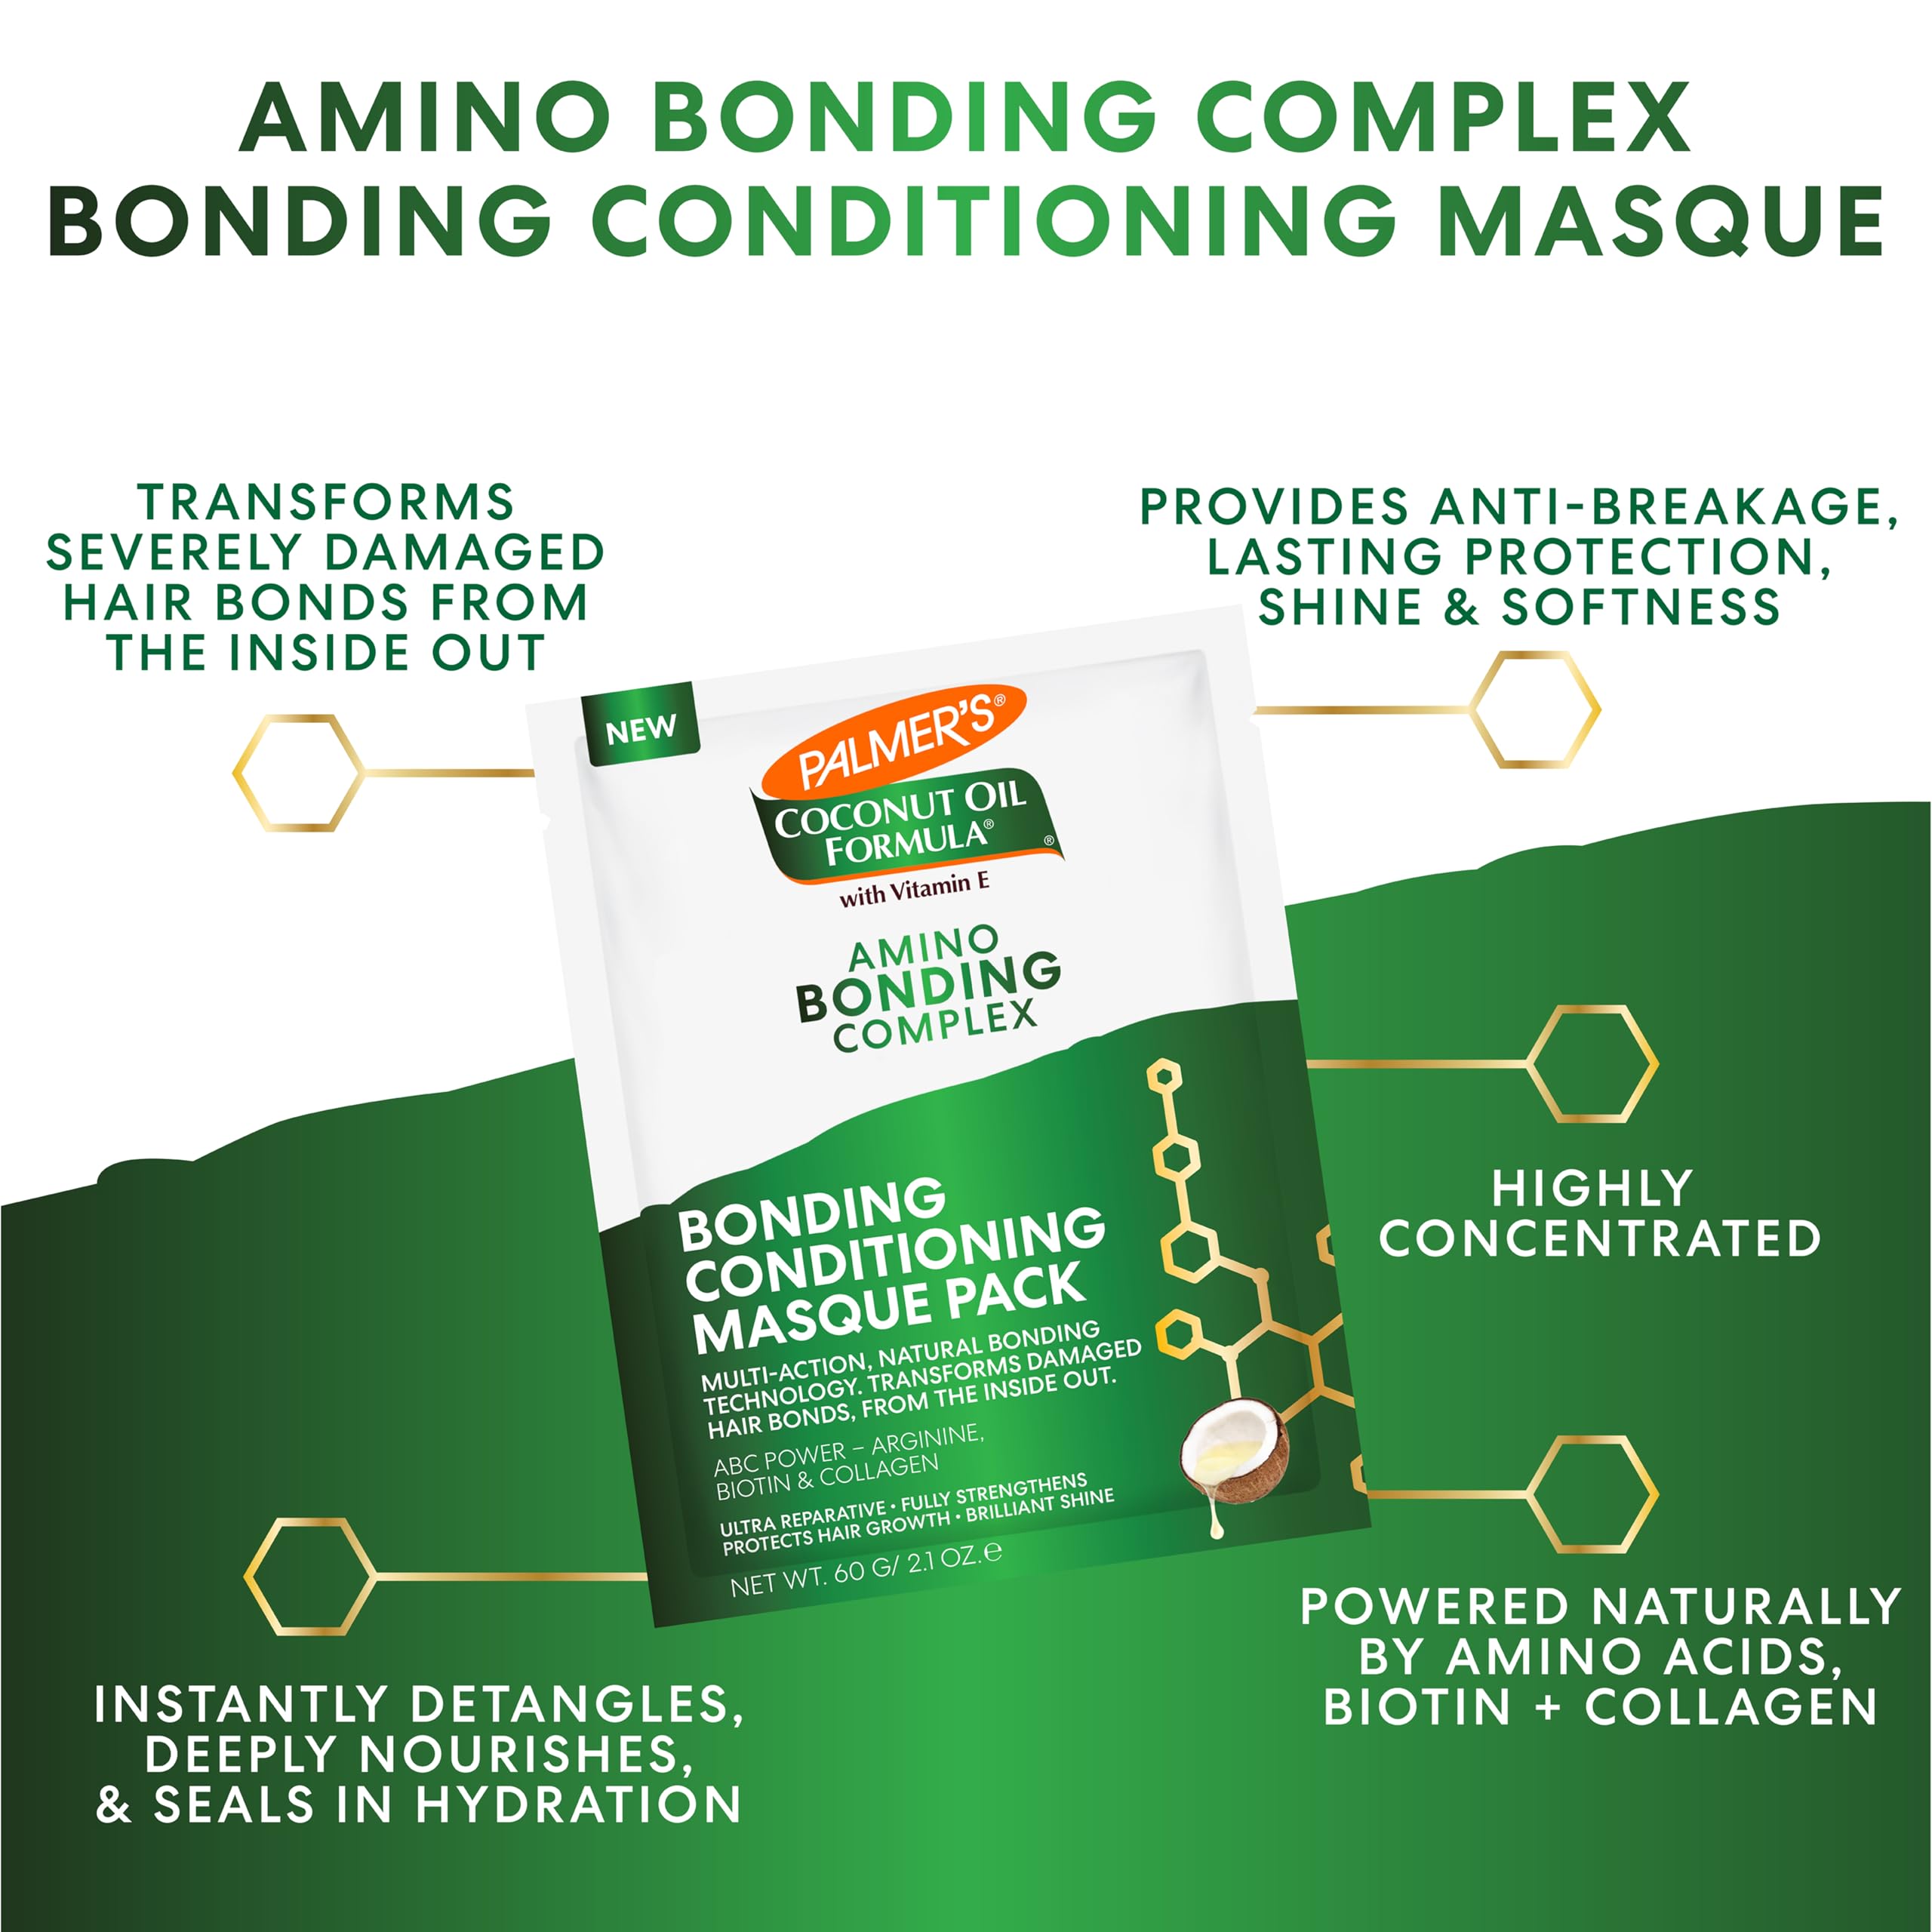 Palmer's Amino Bonding Complex Hair Mask, Intense Conditioning Masque Pack with Coconut Oil & Vitamin E, Heat Protectant, Anti Frizz, Adds Shine, Protects Hair Growth, All Hair Types, 2.1 oz packette